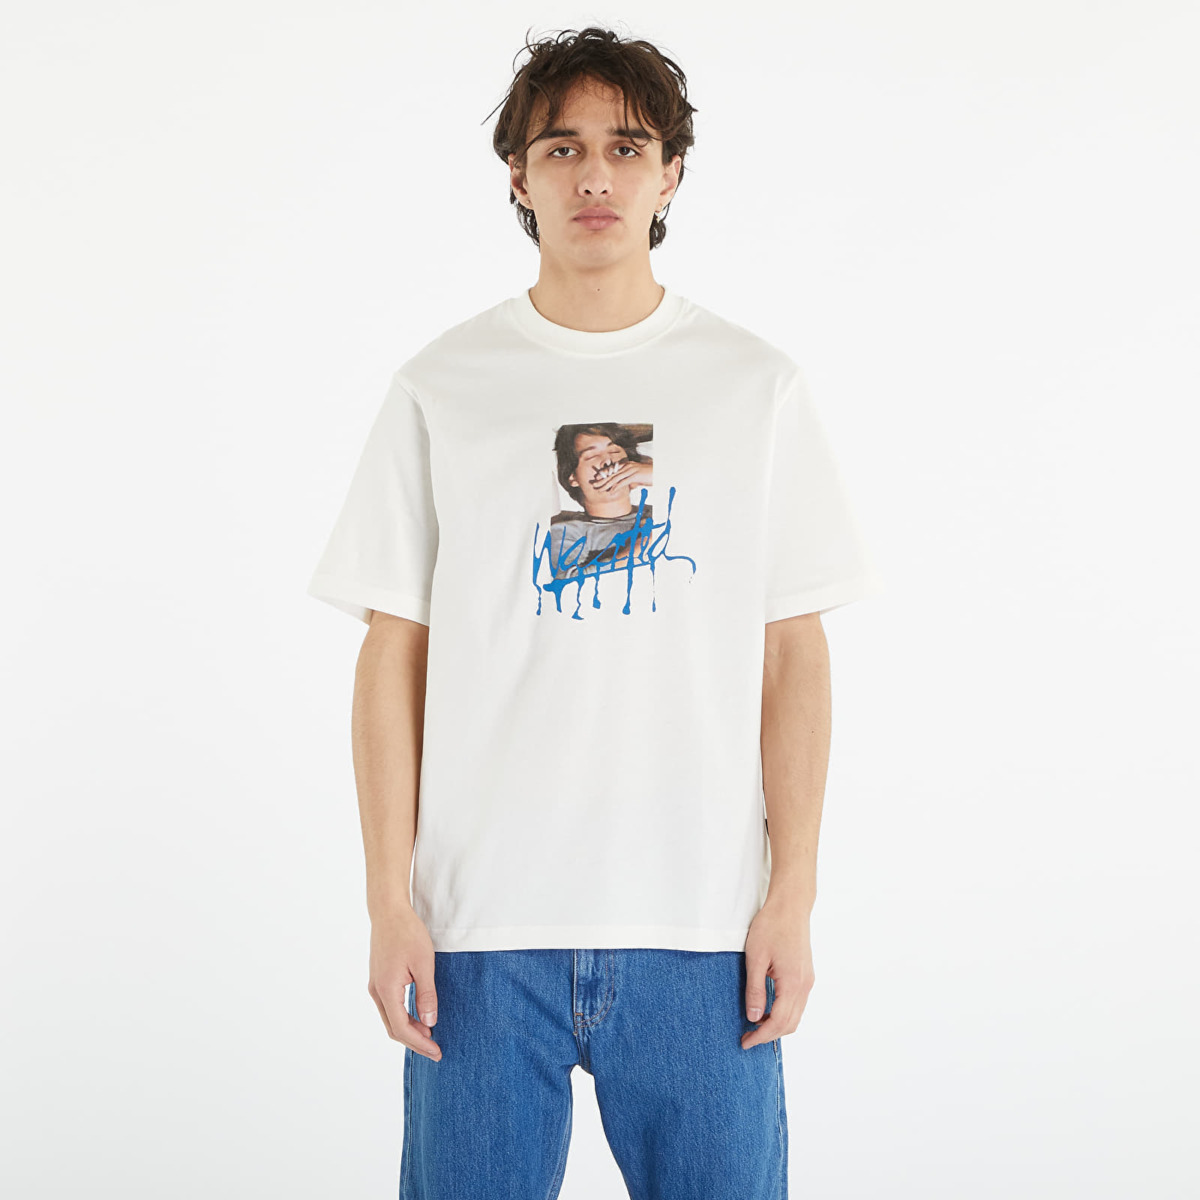 Wasted Paris - Top White for Men from Footshop GOOFASH